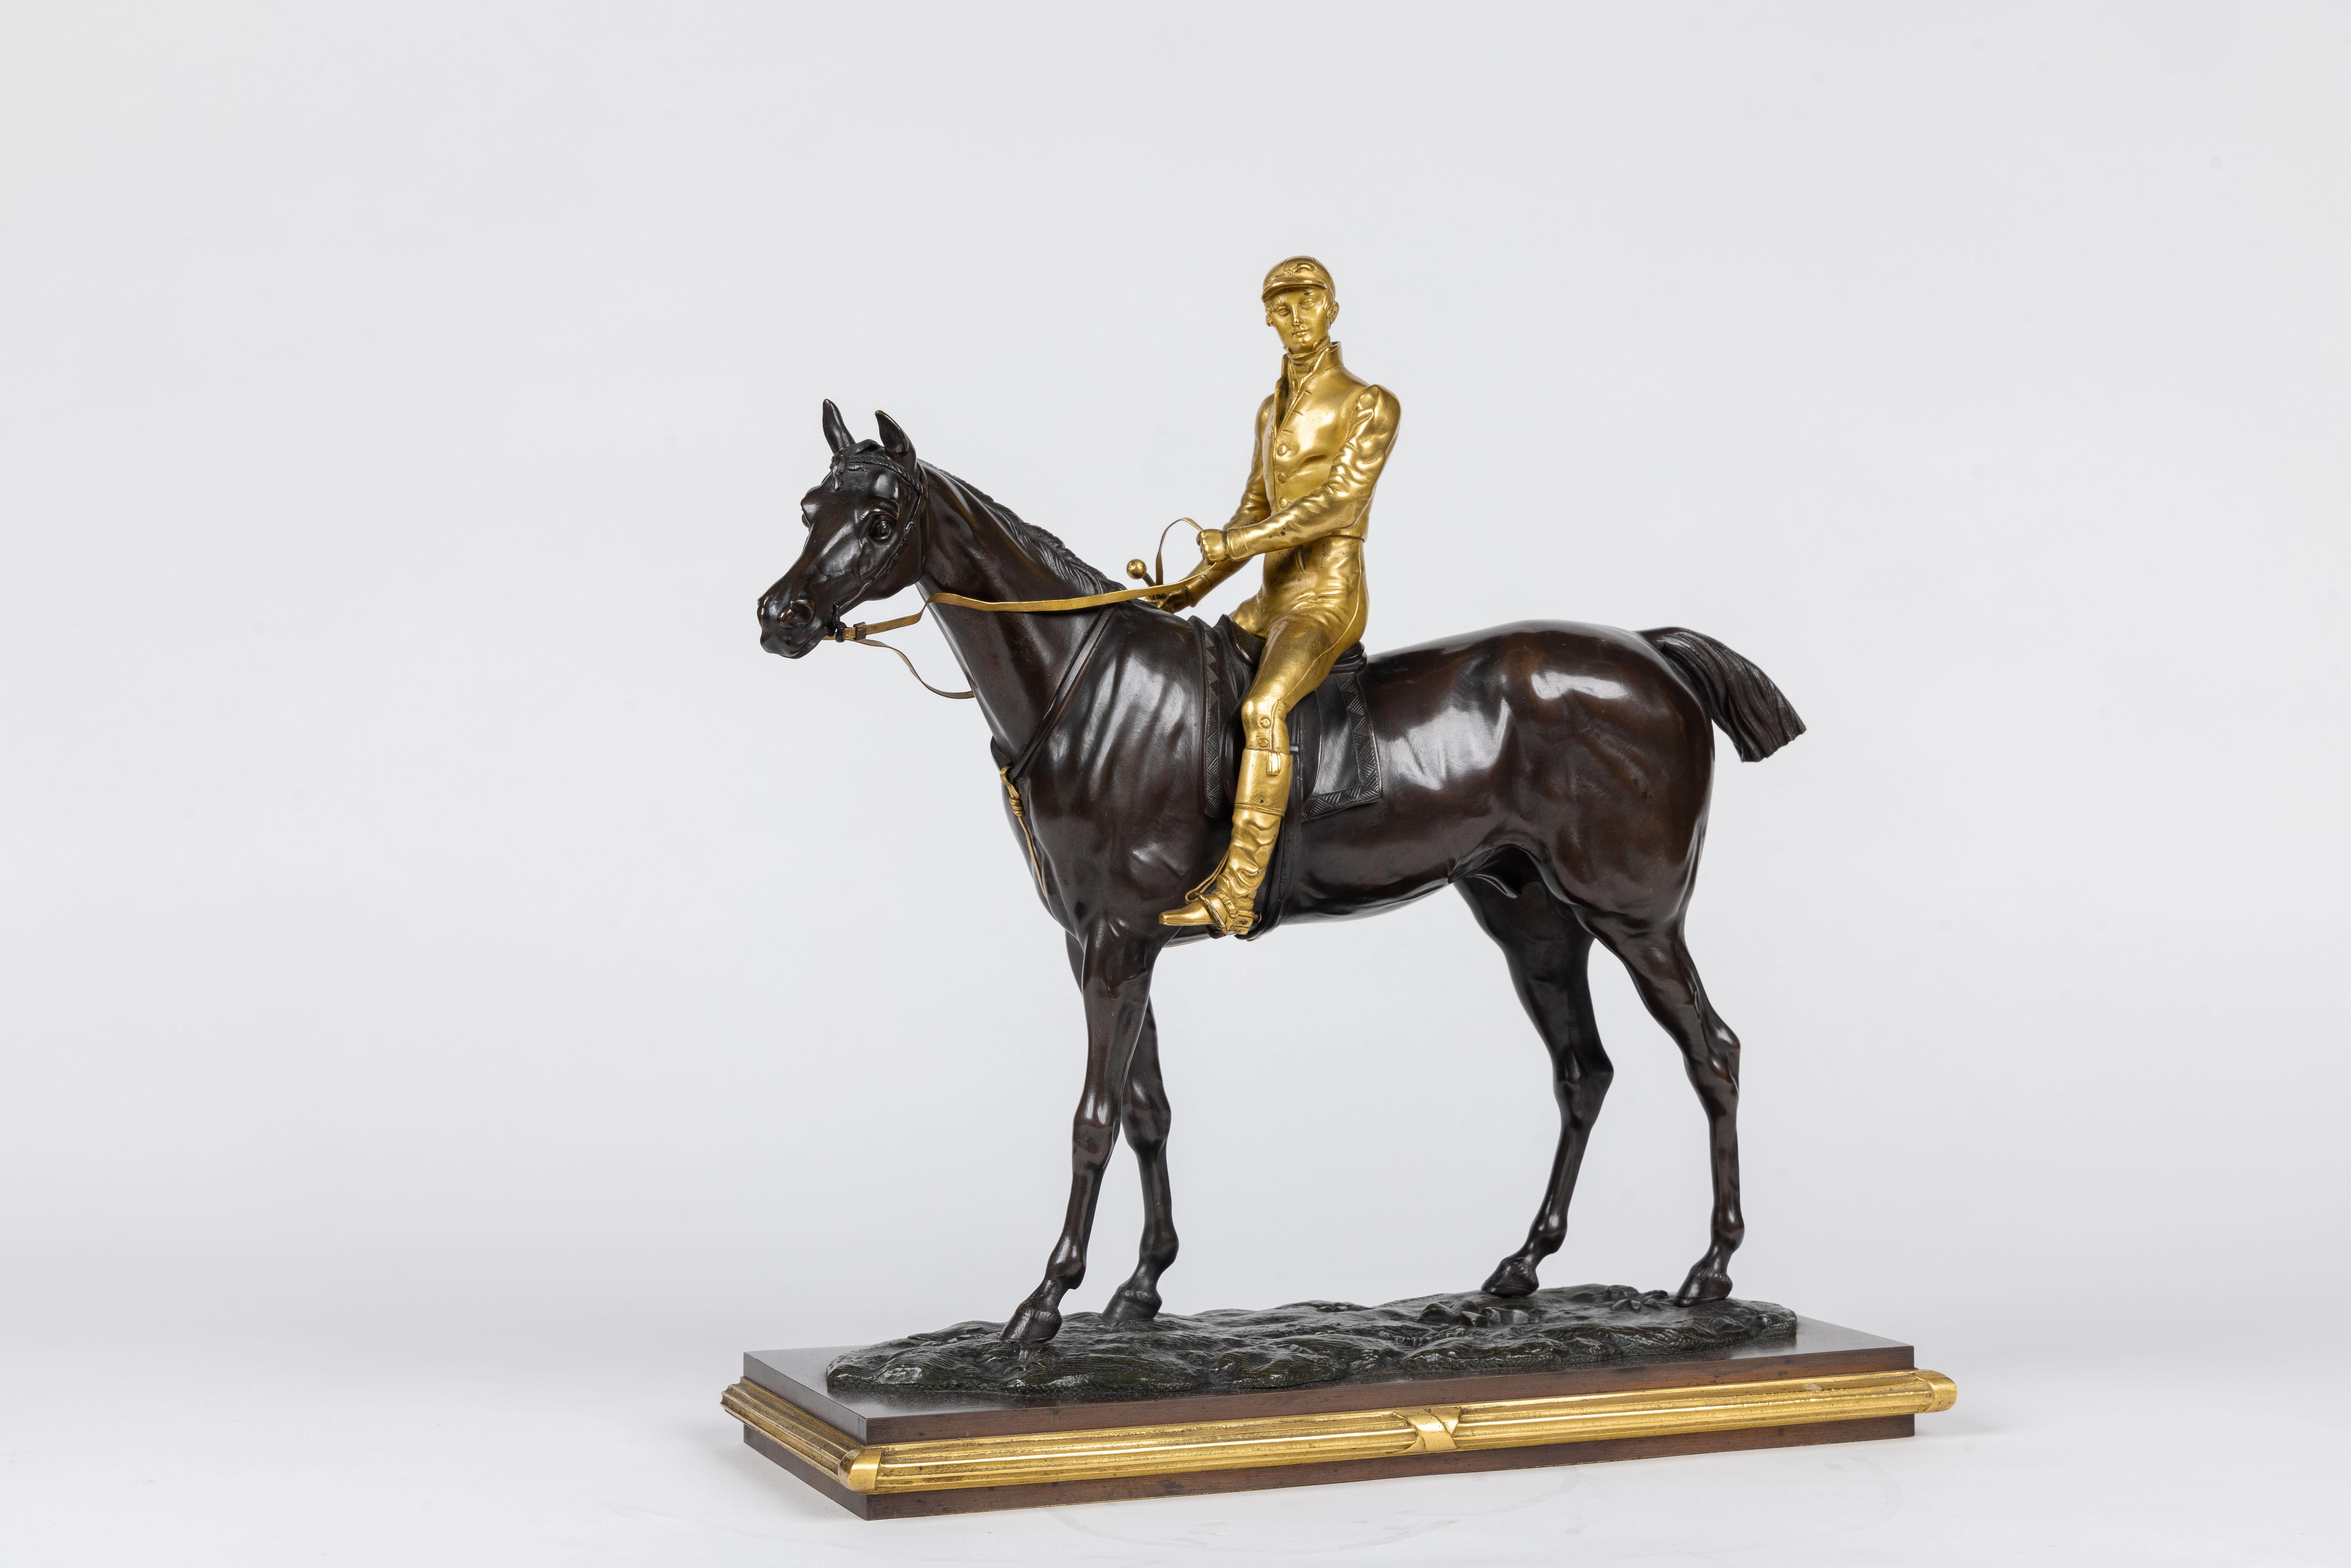 Isidore-Jules Bonheur (French, 1827–1901)

A Rare Gilt and Patinated Bronze Jockey on A Horse, circa 1875.

Introducing a truly exceptional and highly sought-after piece, a rare gilt and patinated bronze sculpture titled 